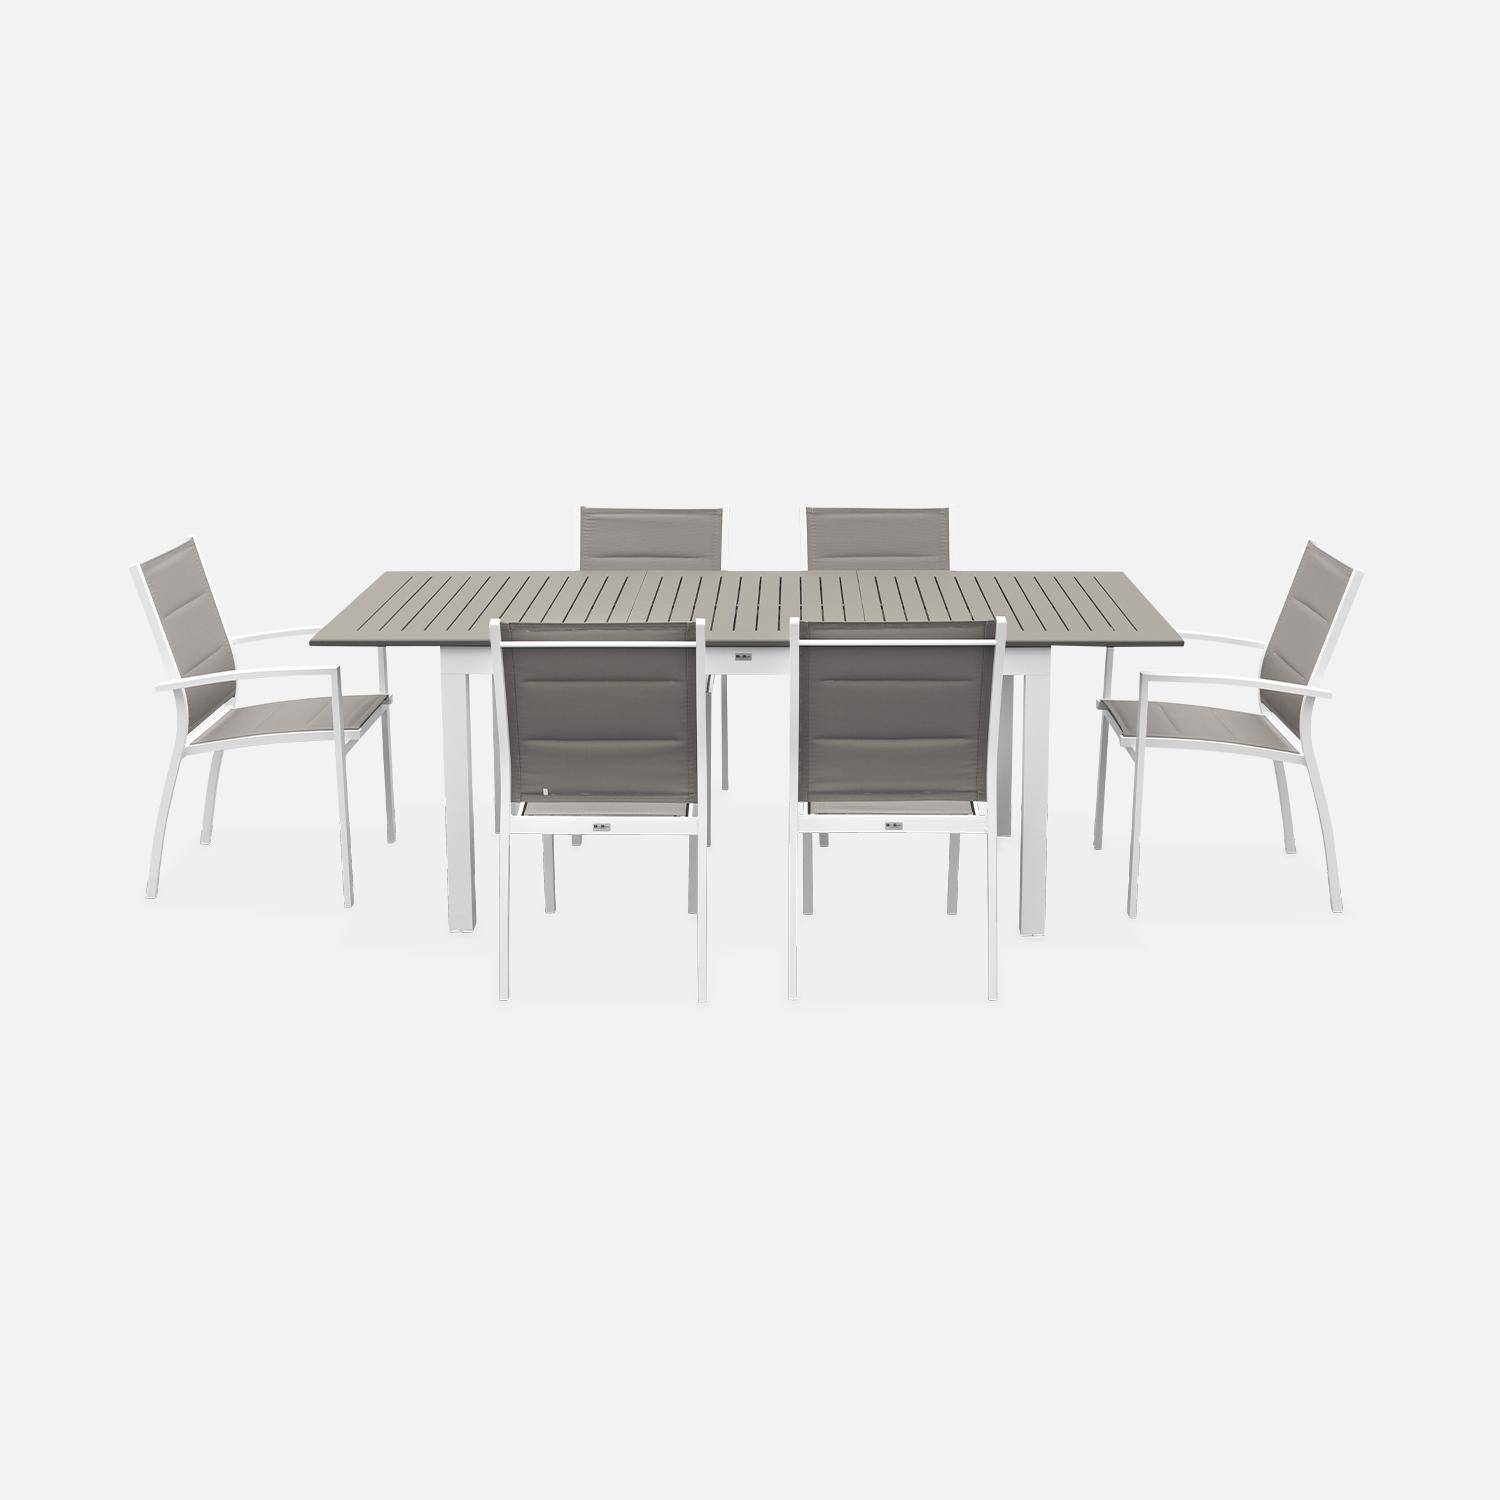 6-seater garden dining set, extendable 150-210cm aluminium table, 4 chairs and 2 armchairs - Chicago 6 - White frame, Beige-Brown textilene,sweeek,Photo3